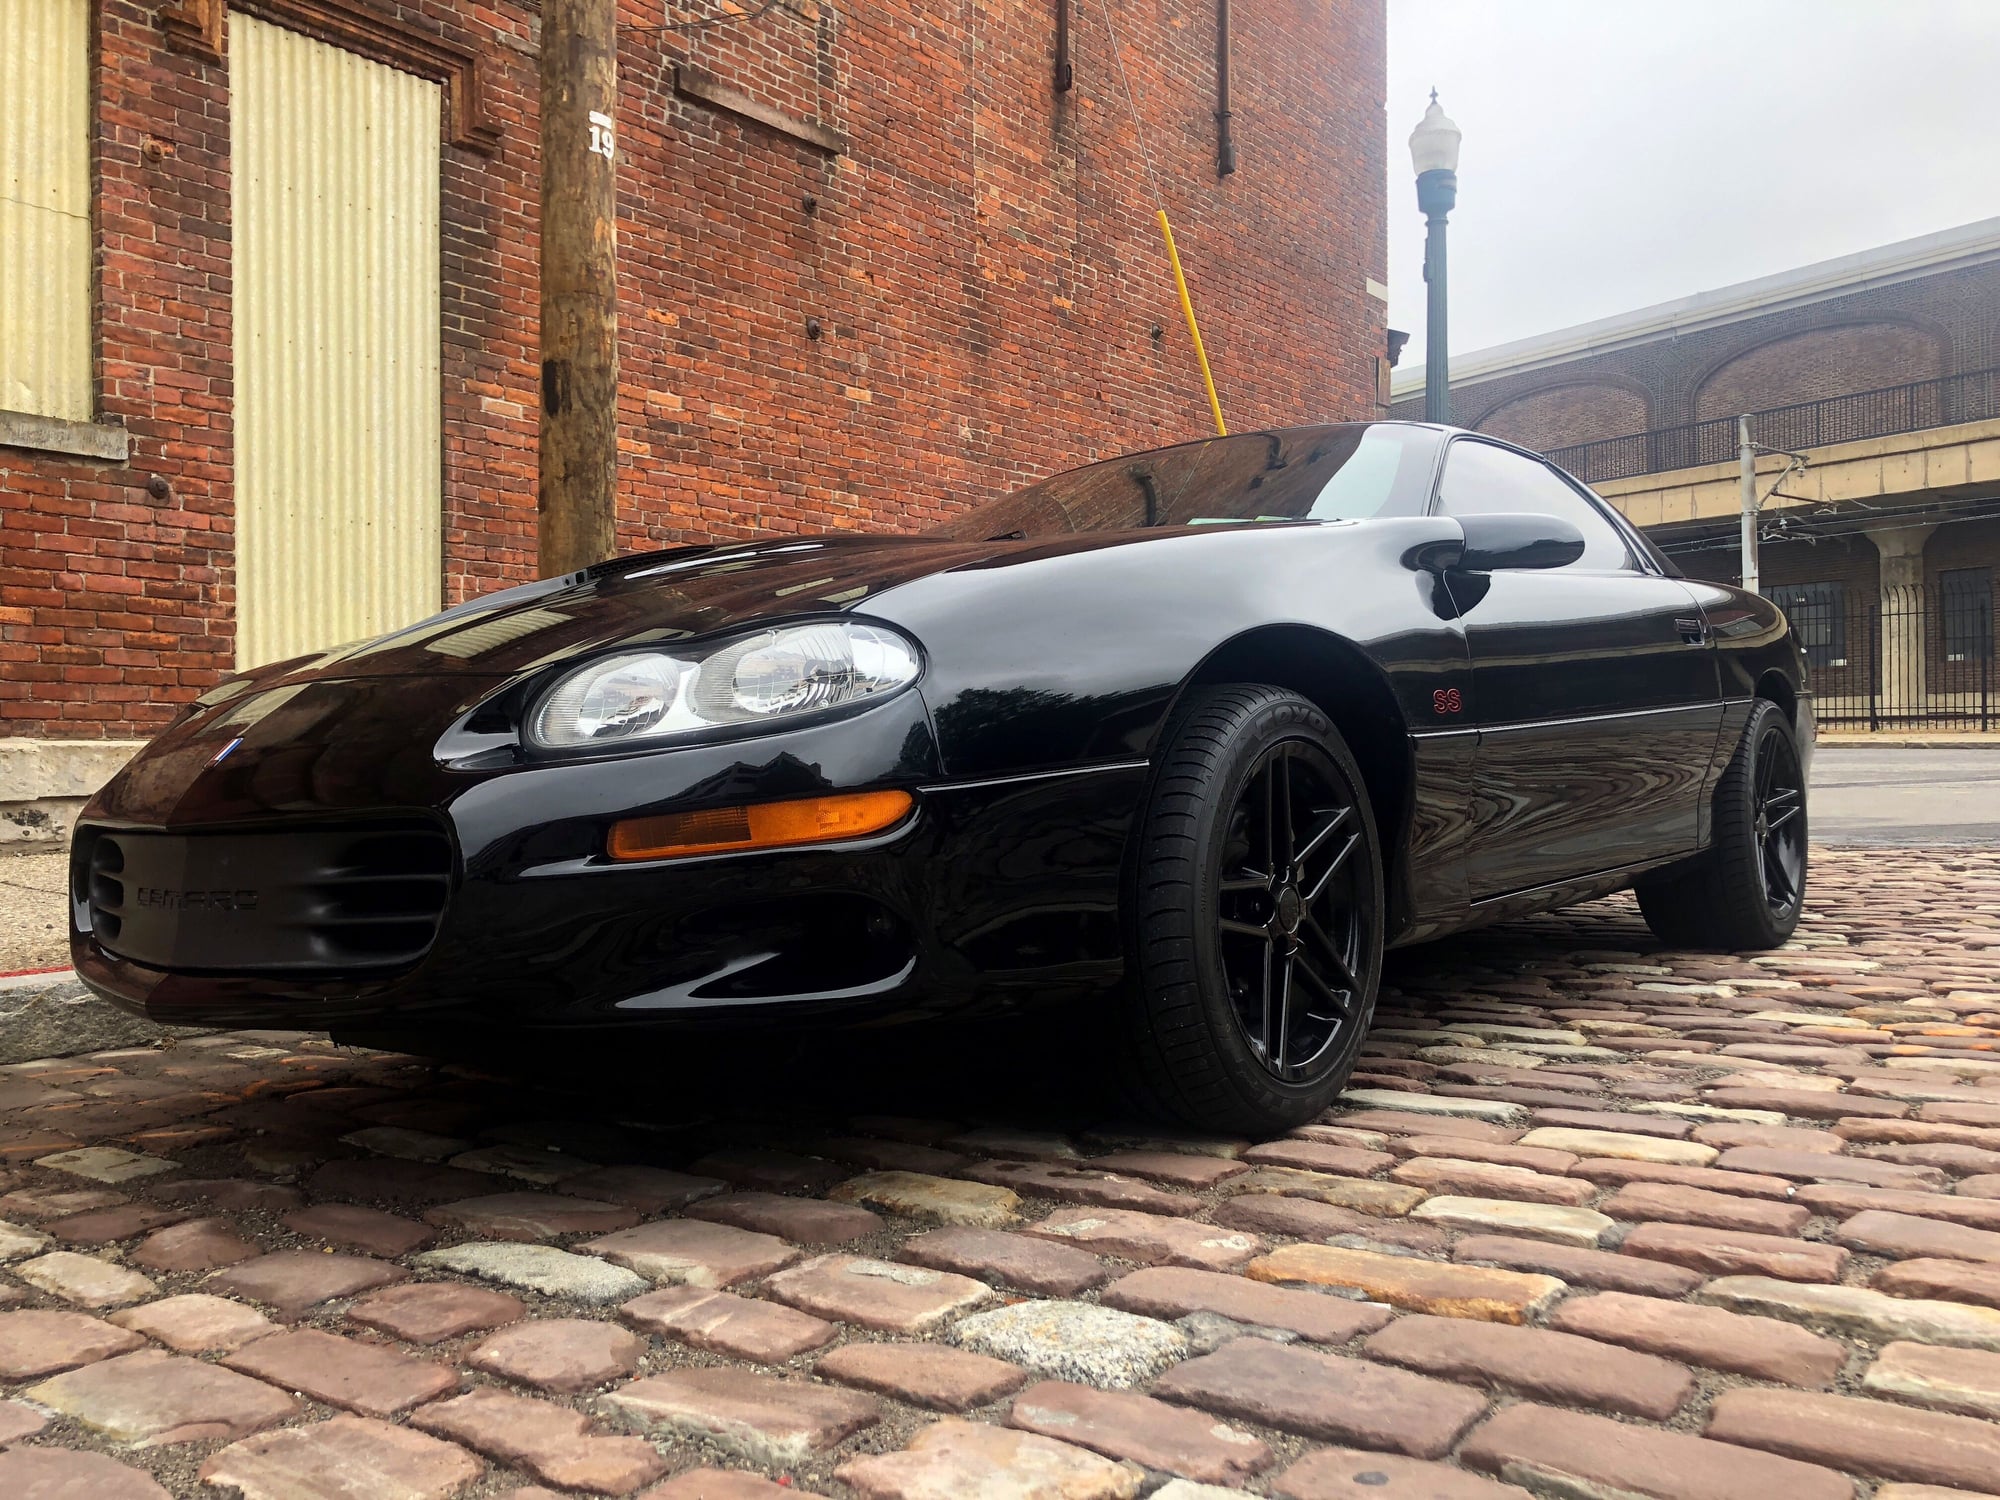 2002 Chevrolet Camaro - 2000 Camaro SS LOW MILES H/C/I 450HP - Used - VIN 12345678912345678 - 45,000 Miles - 8 cyl - 2WD - Automatic - Coupe - Black - Buffalo, NY 14150, United States